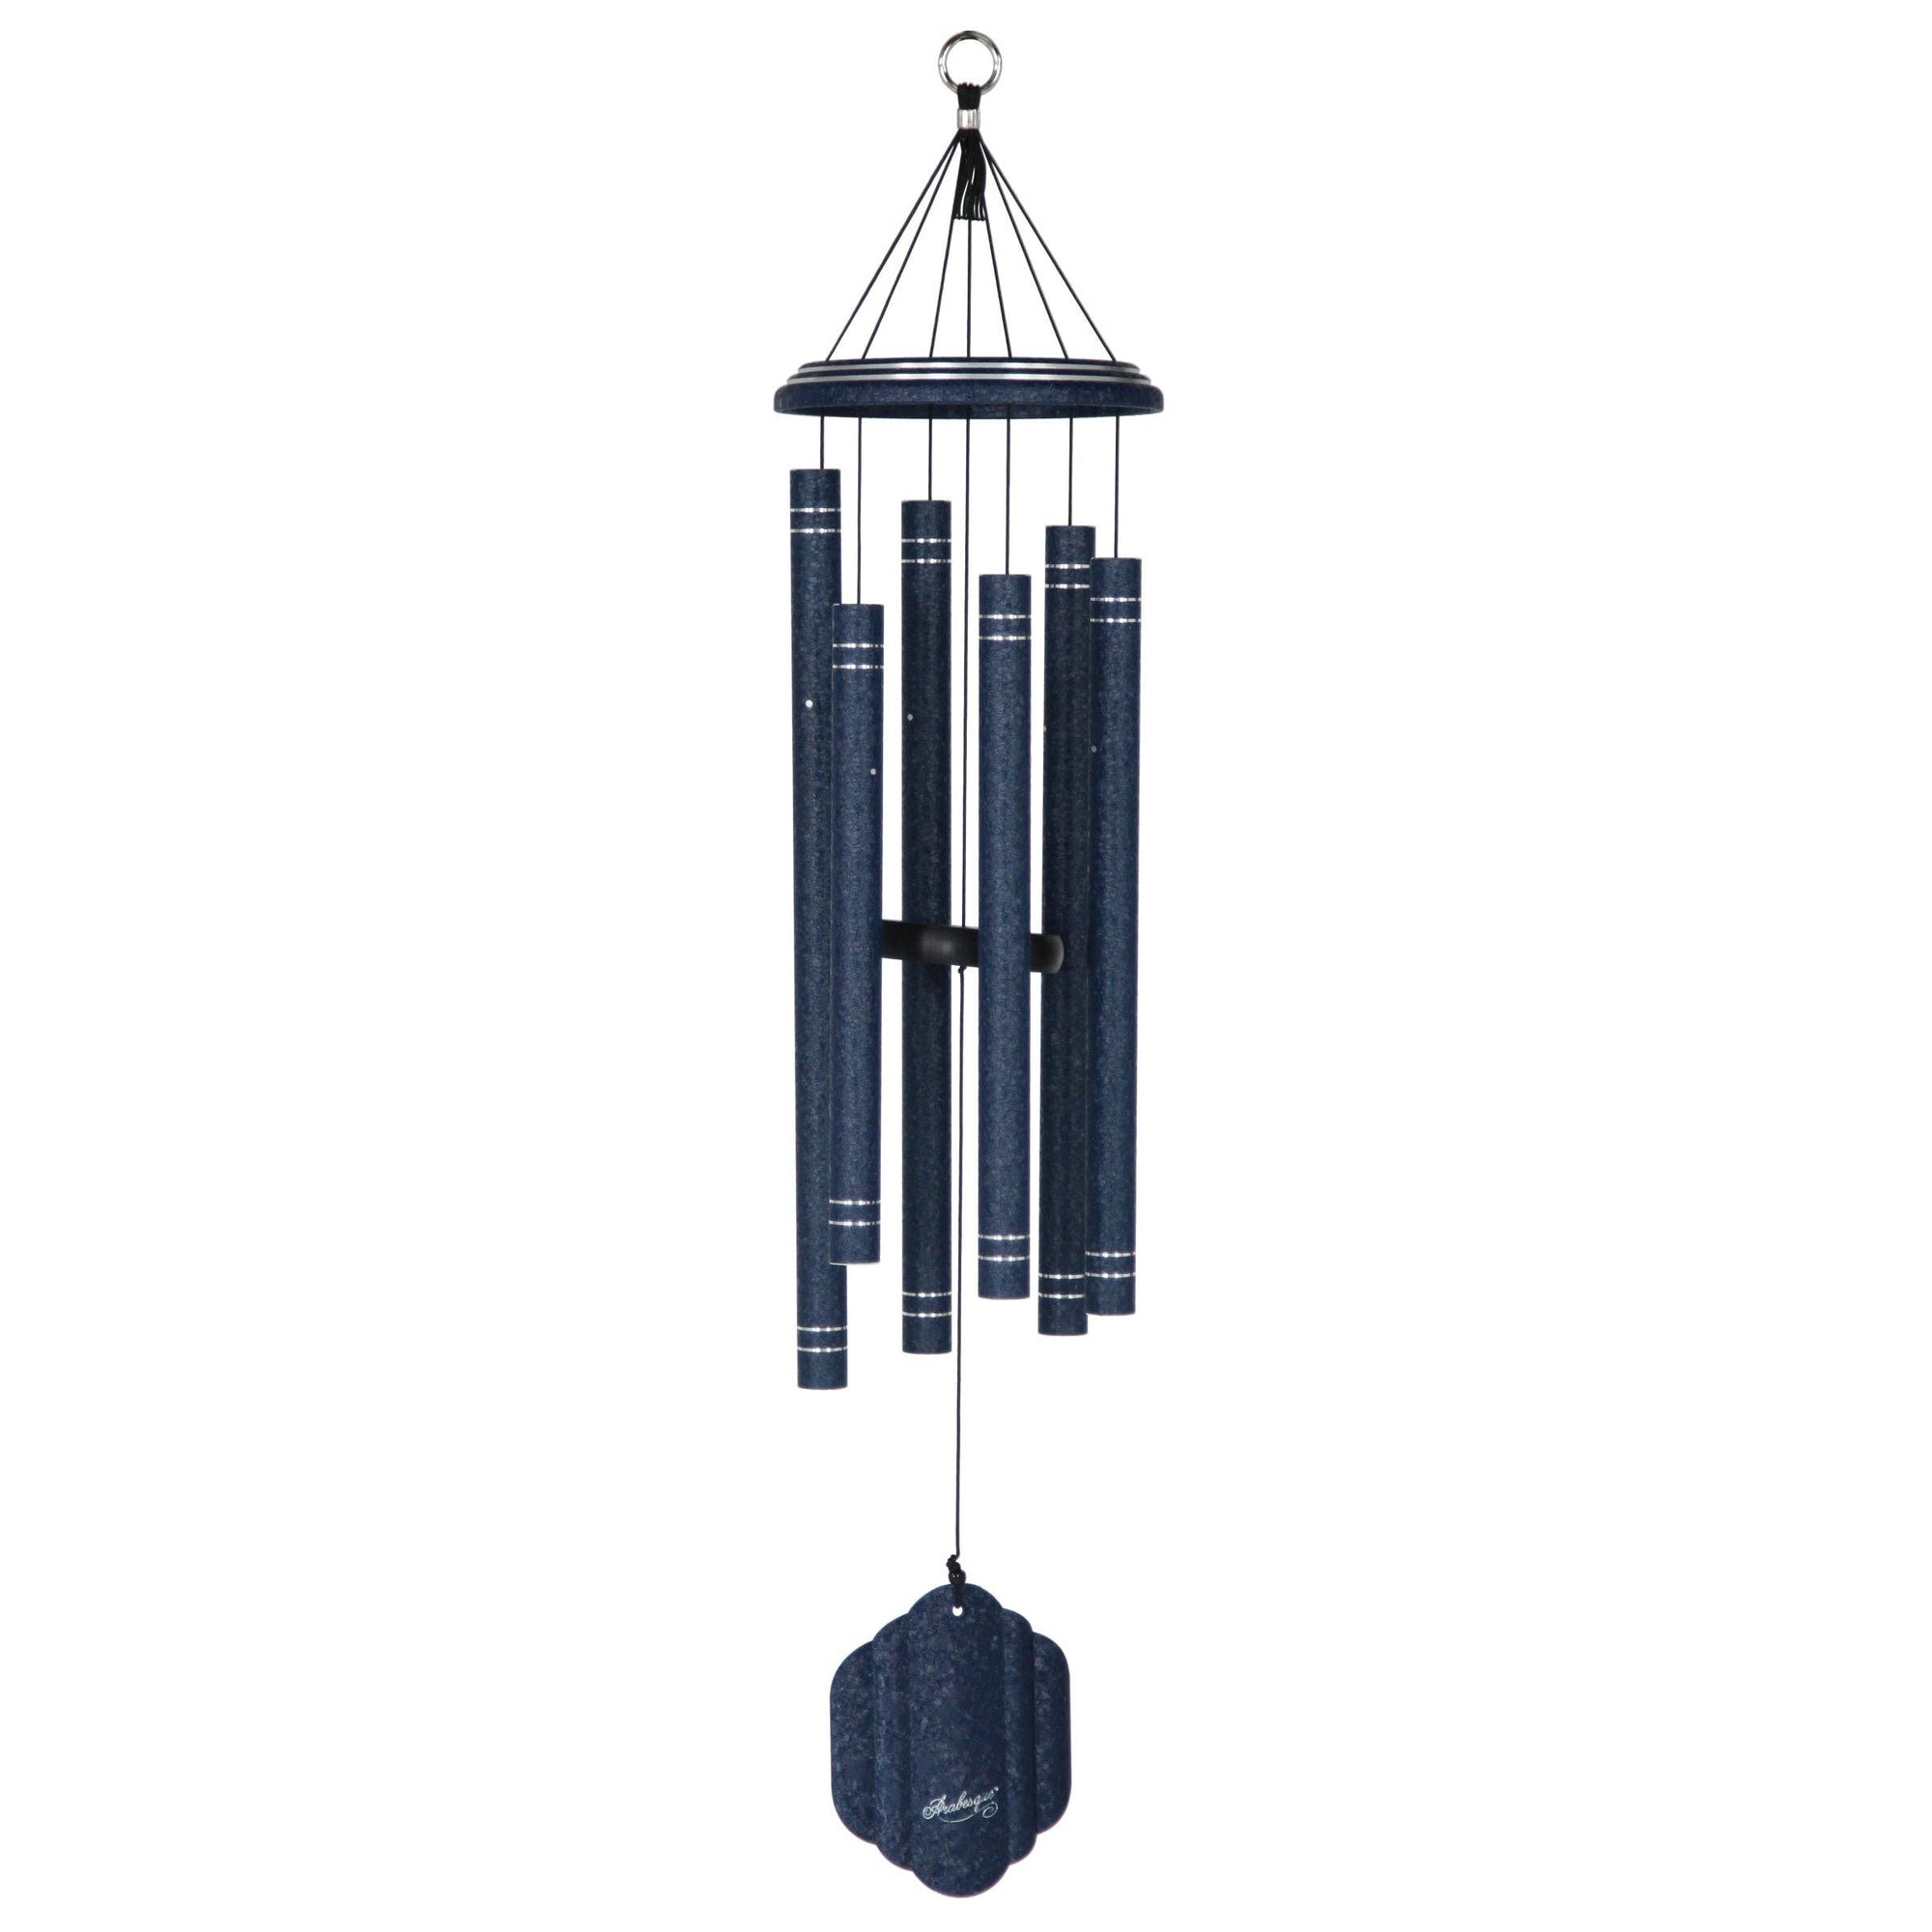 A unique 36" Windchime Arabesque® hanging on a white background.